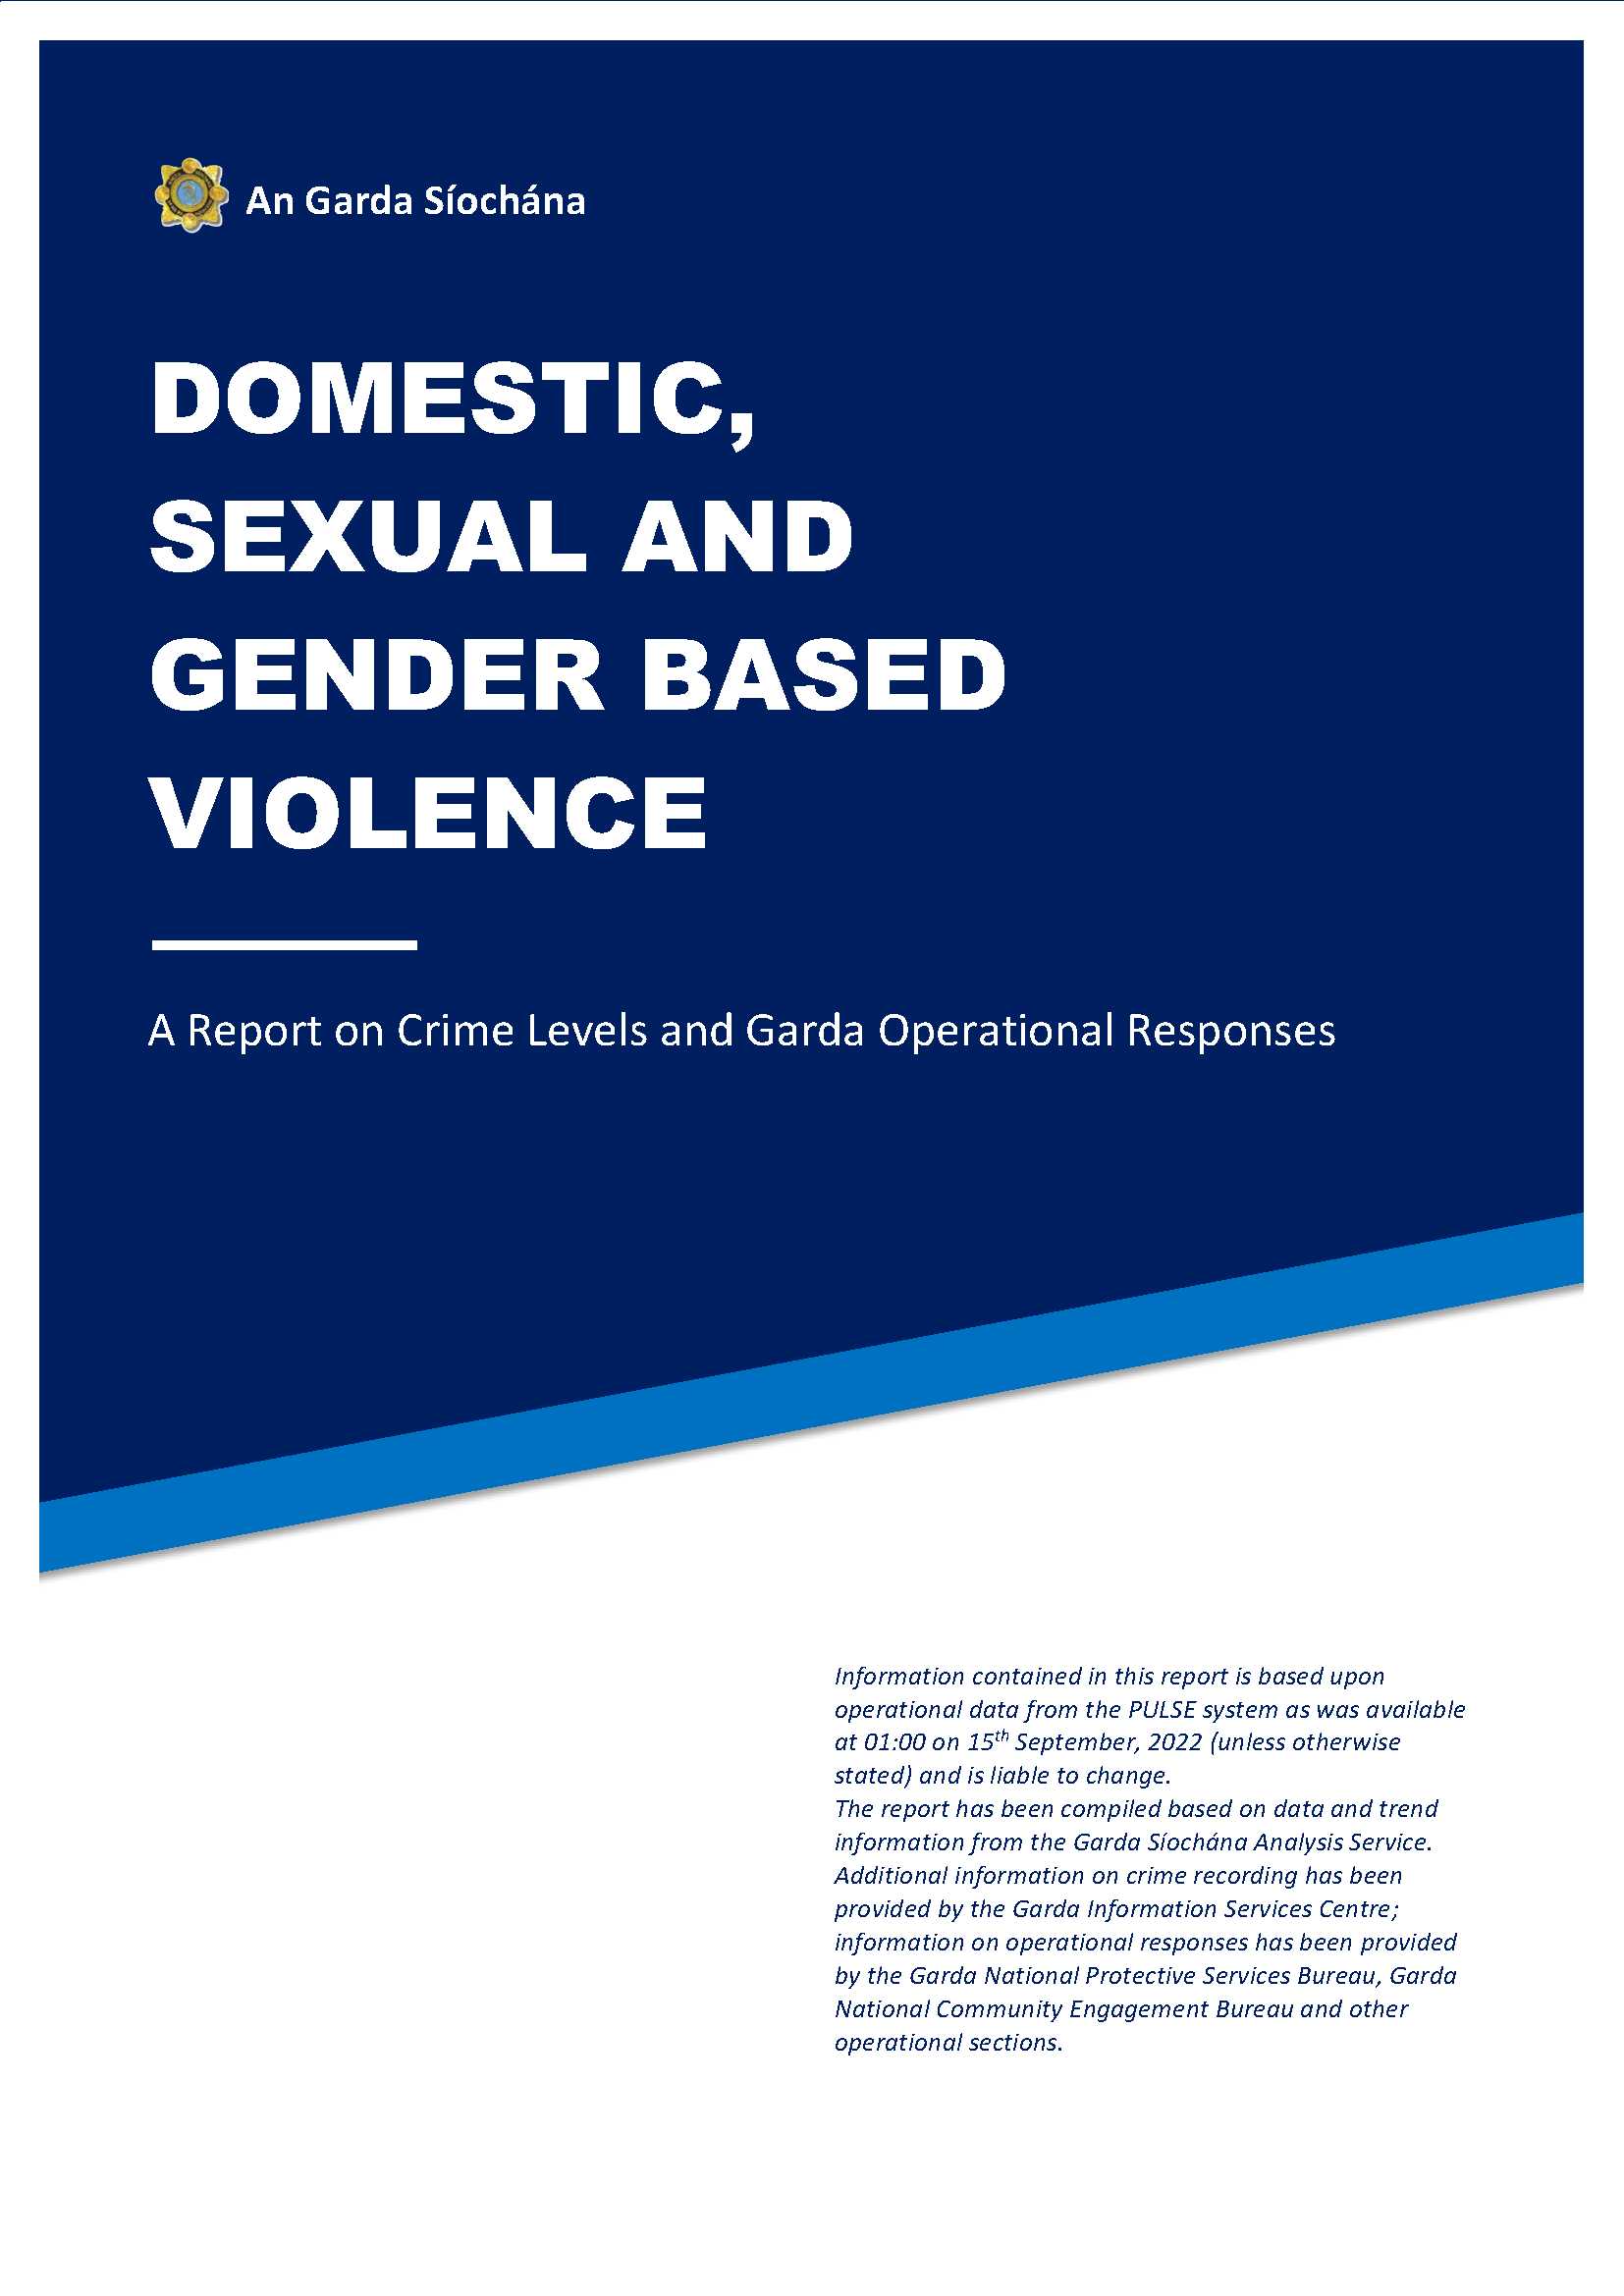 An_Garda_Siochana_Domestic_Sexual_and_Gender_Based_Violence_Report_Sept_22